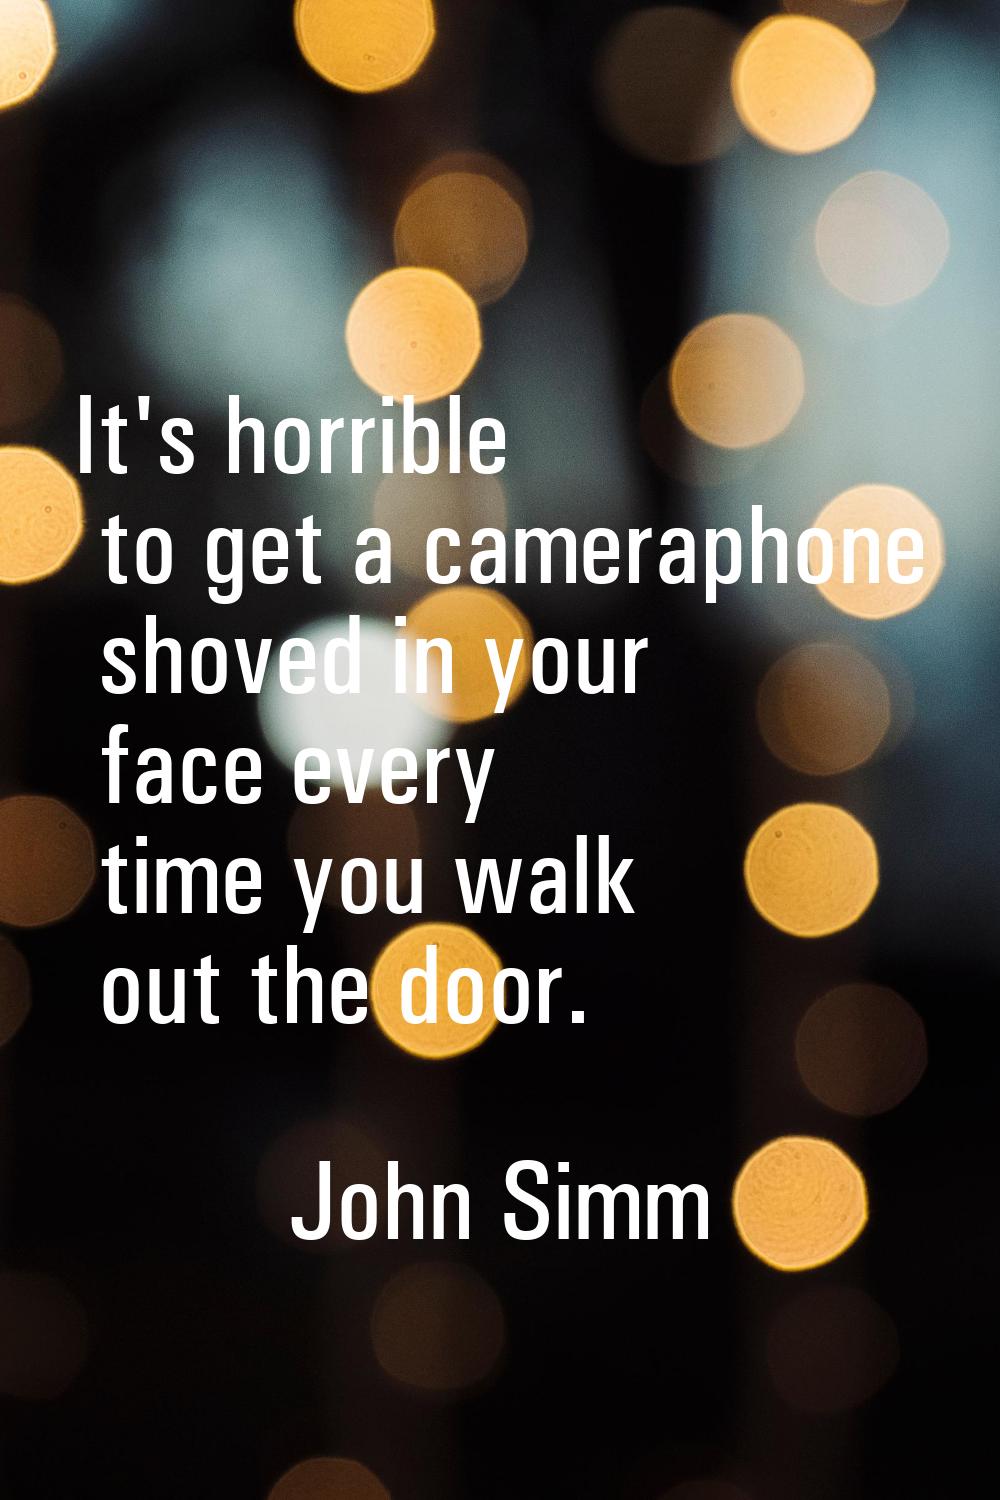 It's horrible to get a cameraphone shoved in your face every time you walk out the door.